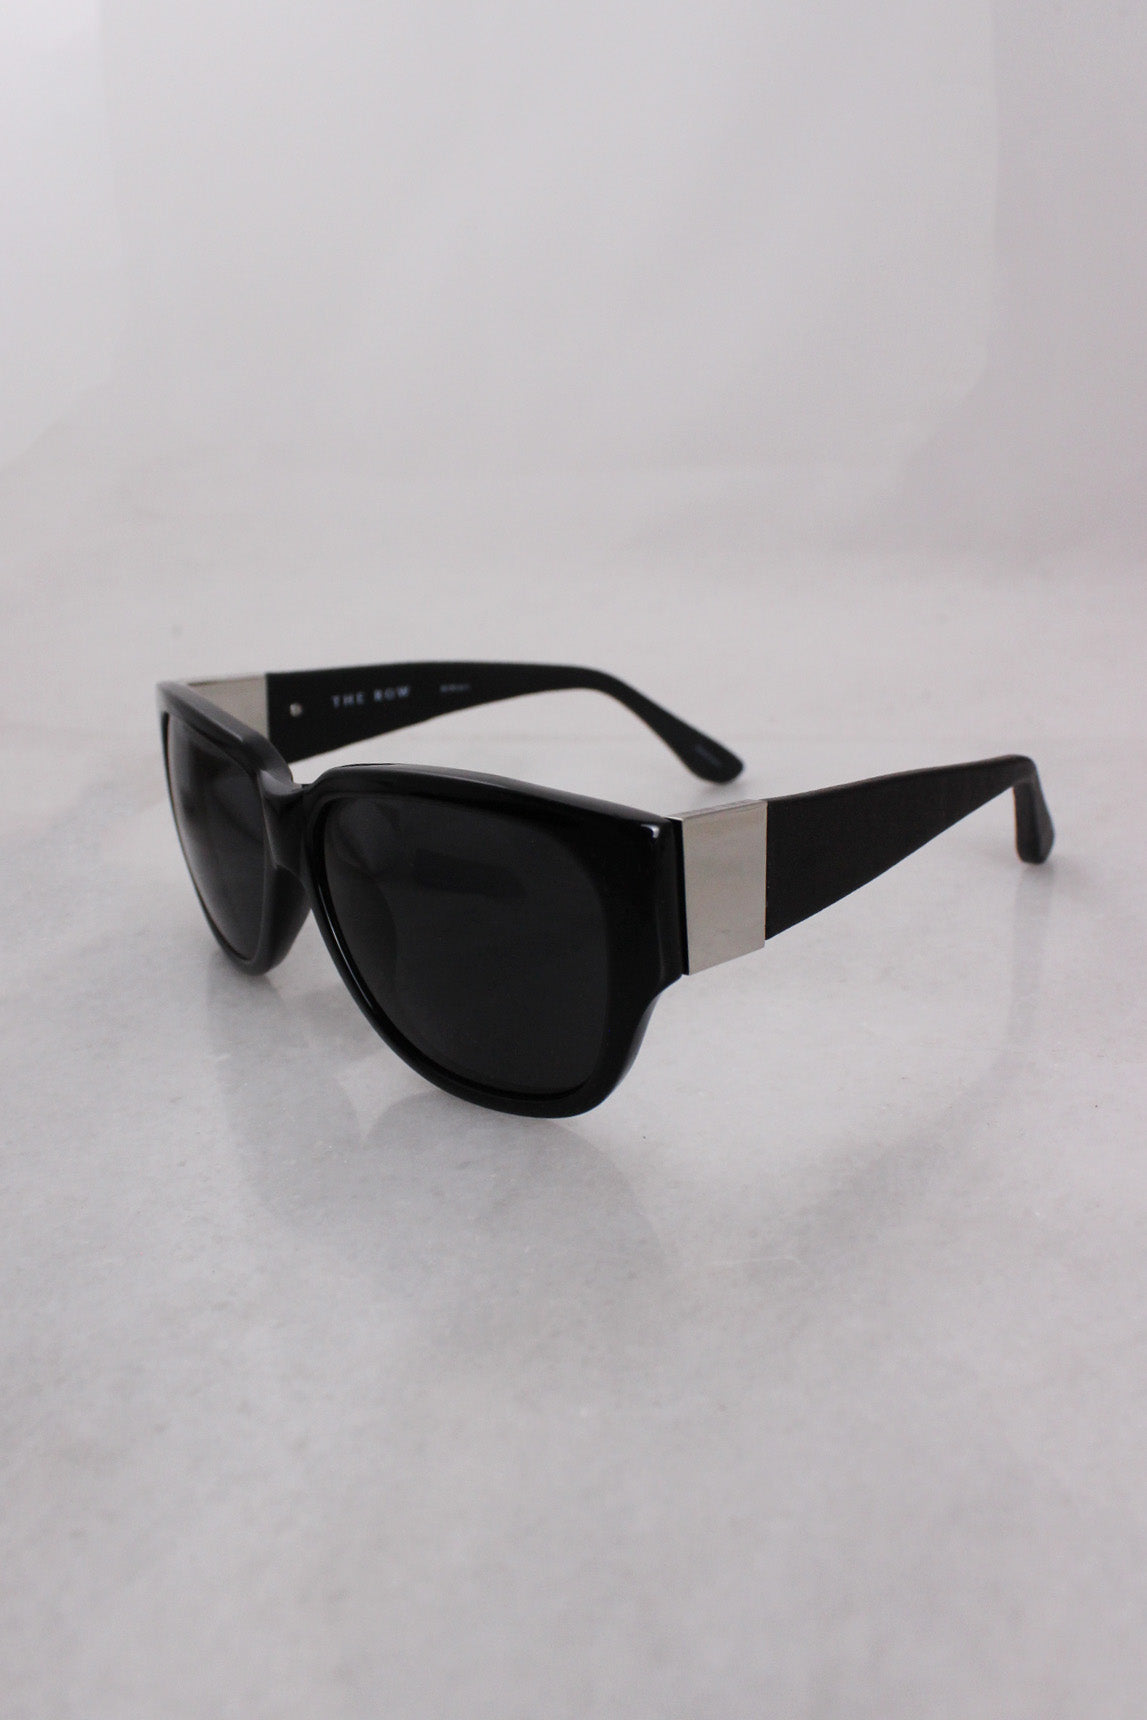 corner angle of sunglasses. silver toned hardware on temples. leather covered arms. 